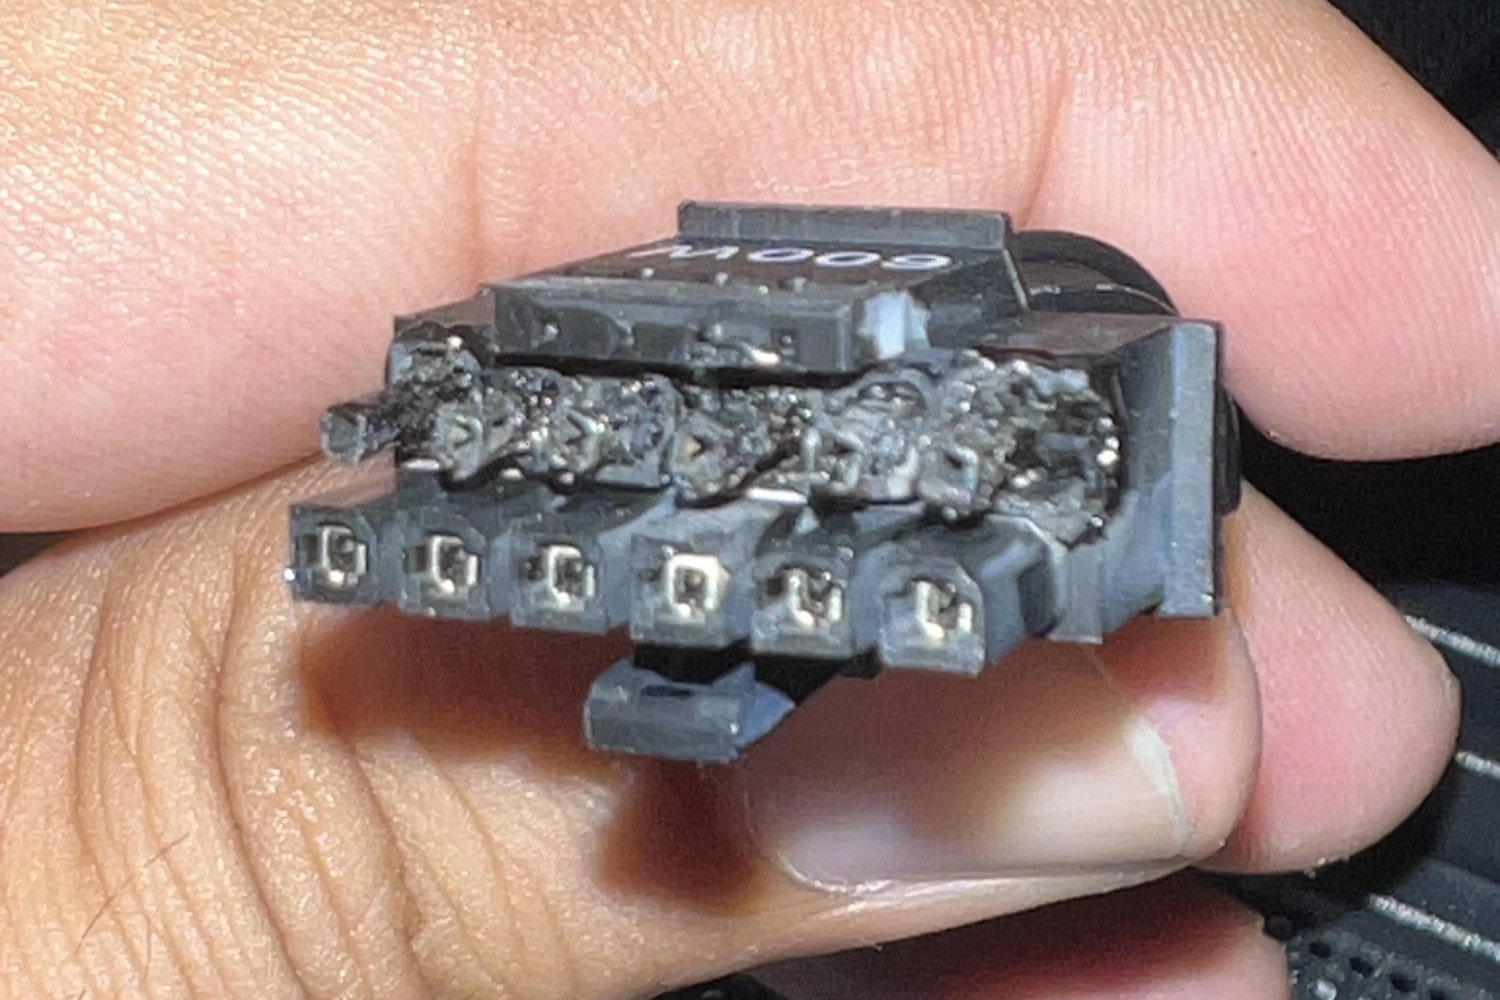 A person holds the connectors of an Nvidia 12VHPWR cable from an RTX 4090 graphics card. The ends of the connectors are burned a